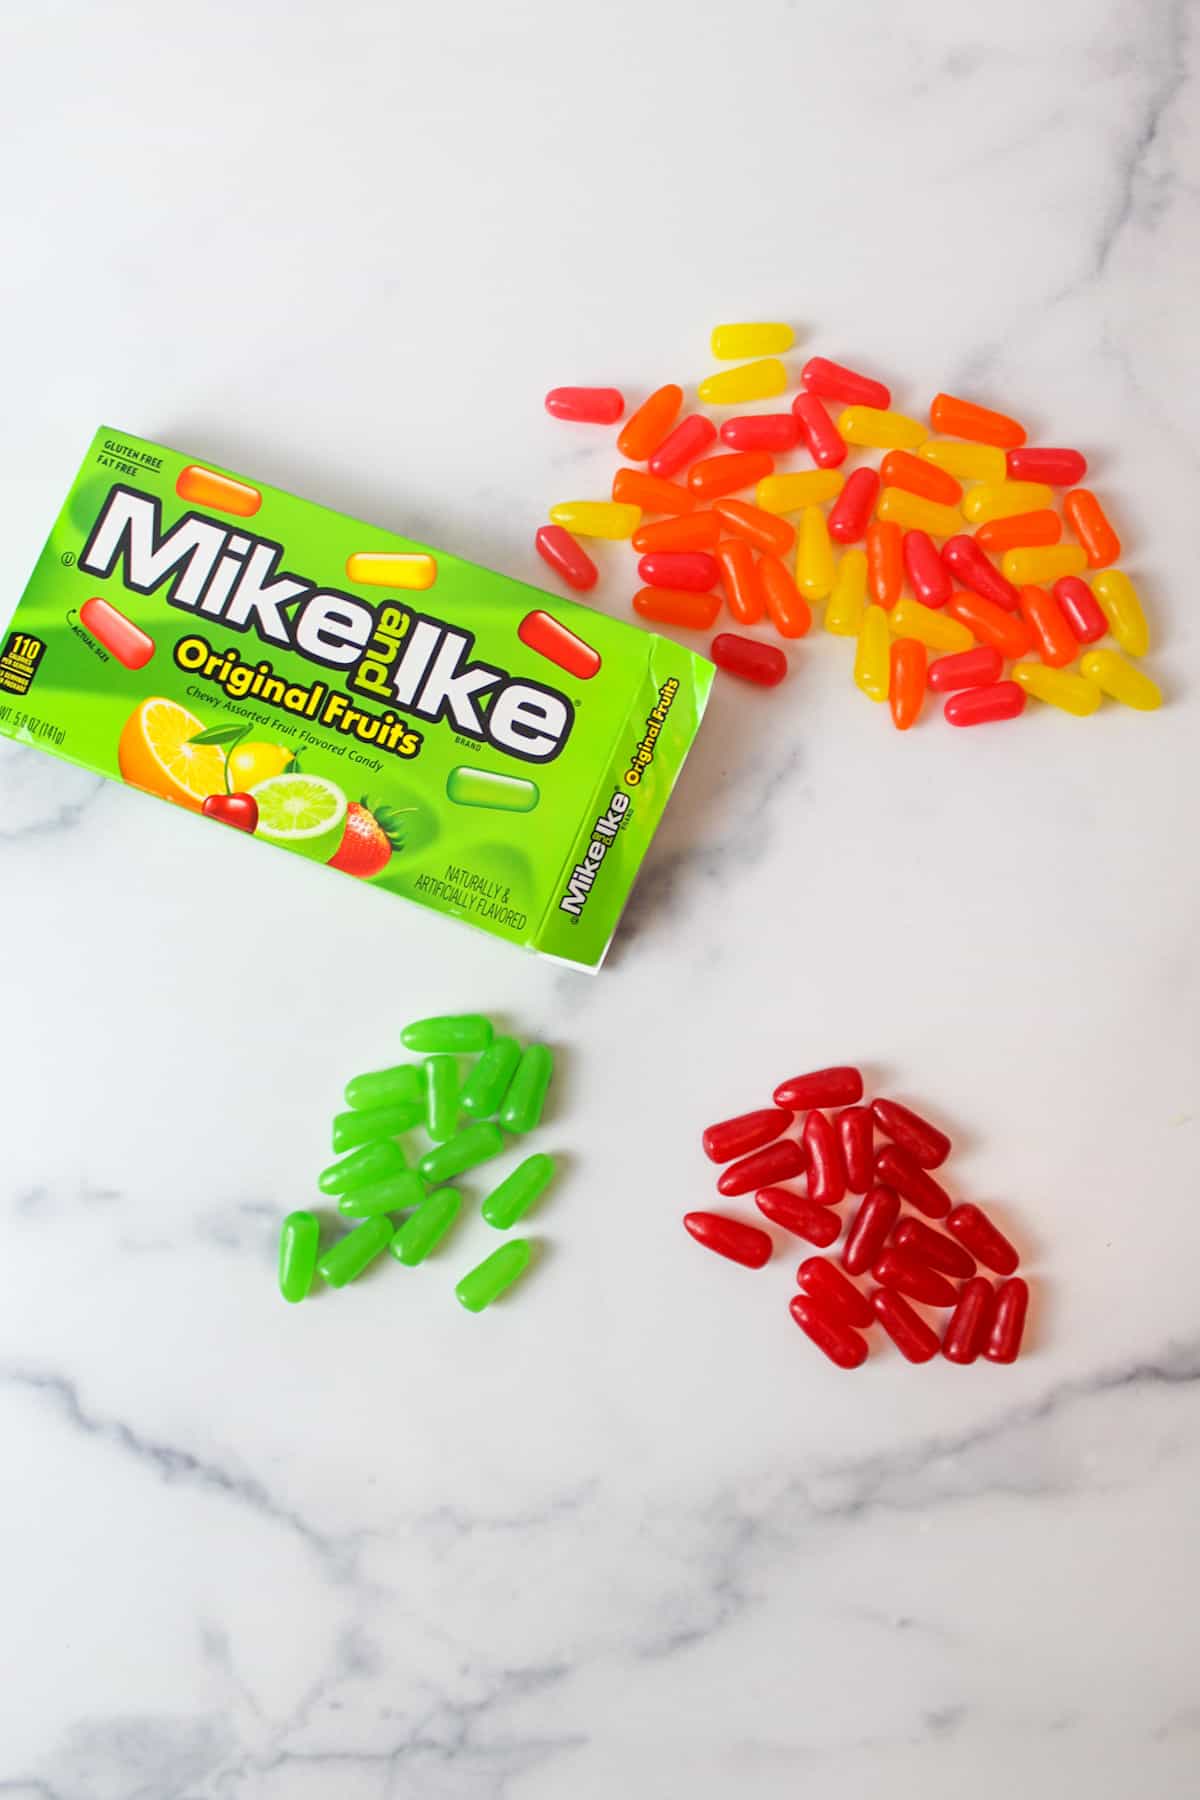 sorted mike and ike candies